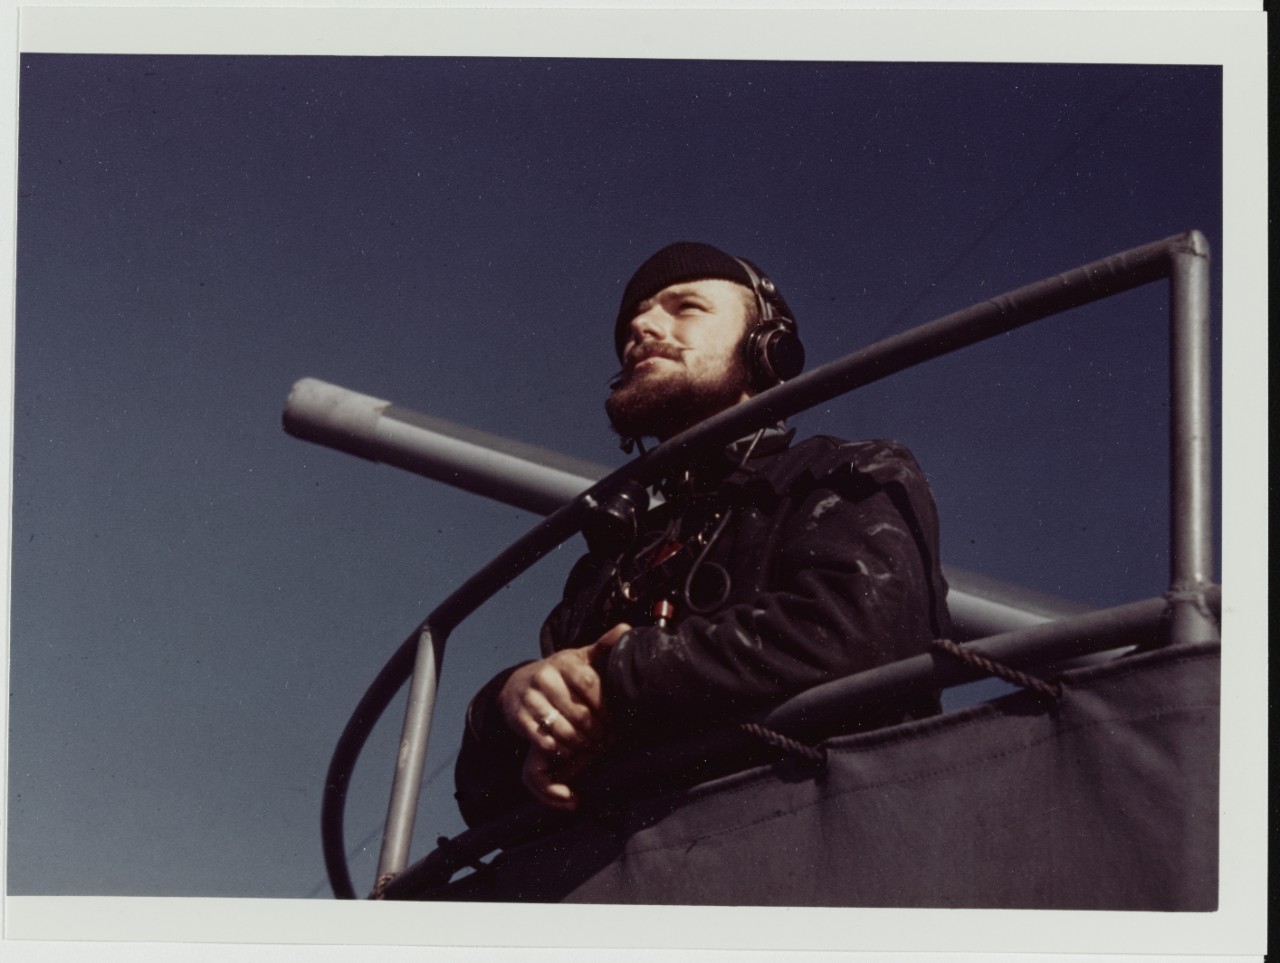 USCGC CAMPBELL (WPG-32). Lookout at his post, near one of the ship's guns, 1943